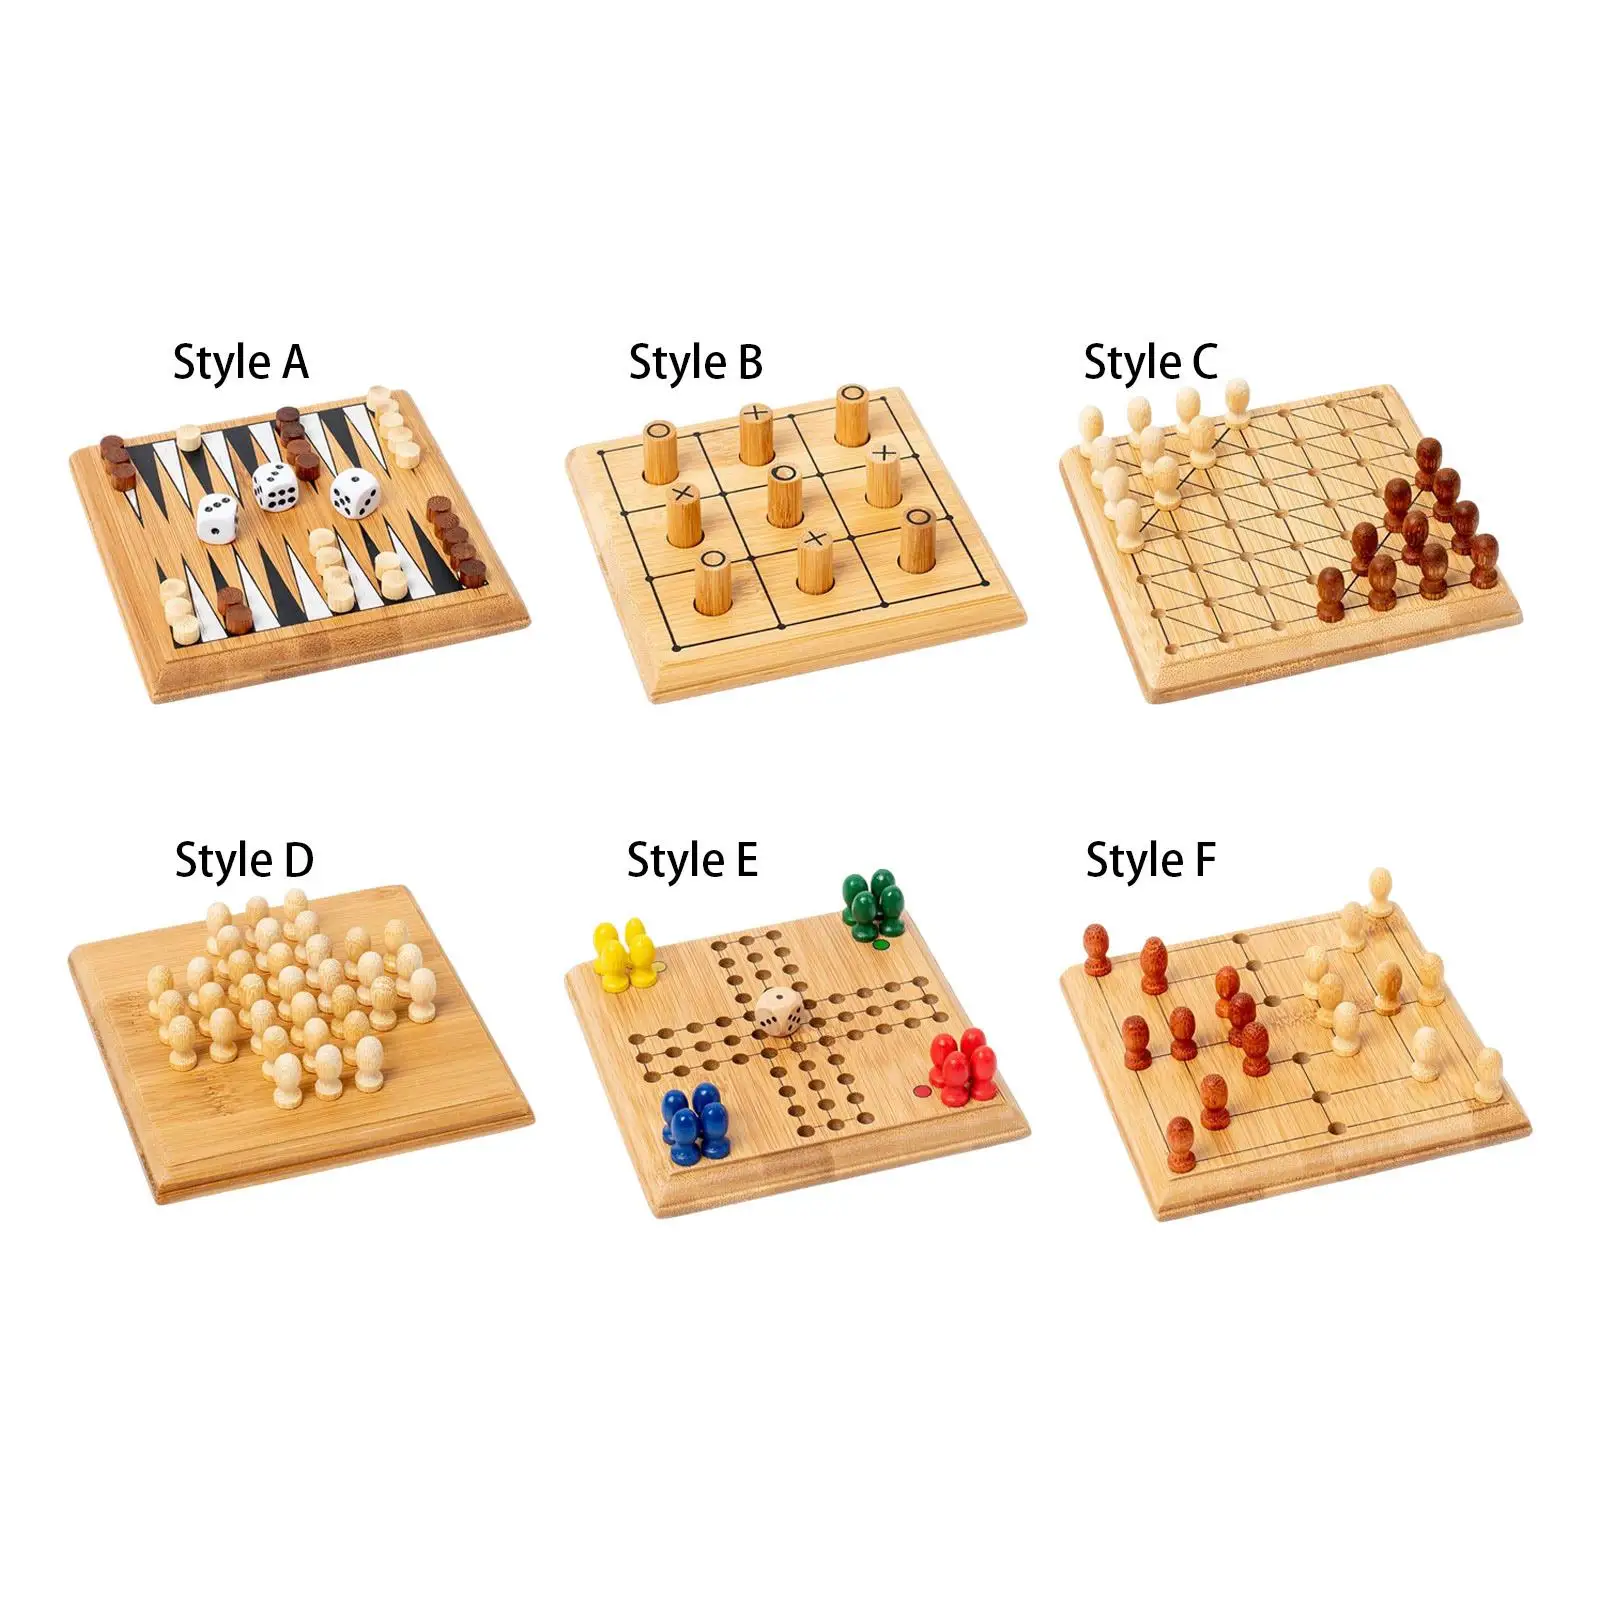 Traditional Wooden Board Game with Playing Pieces and Accessories Logical Thinking Brain Training Puzzle for Adults Party